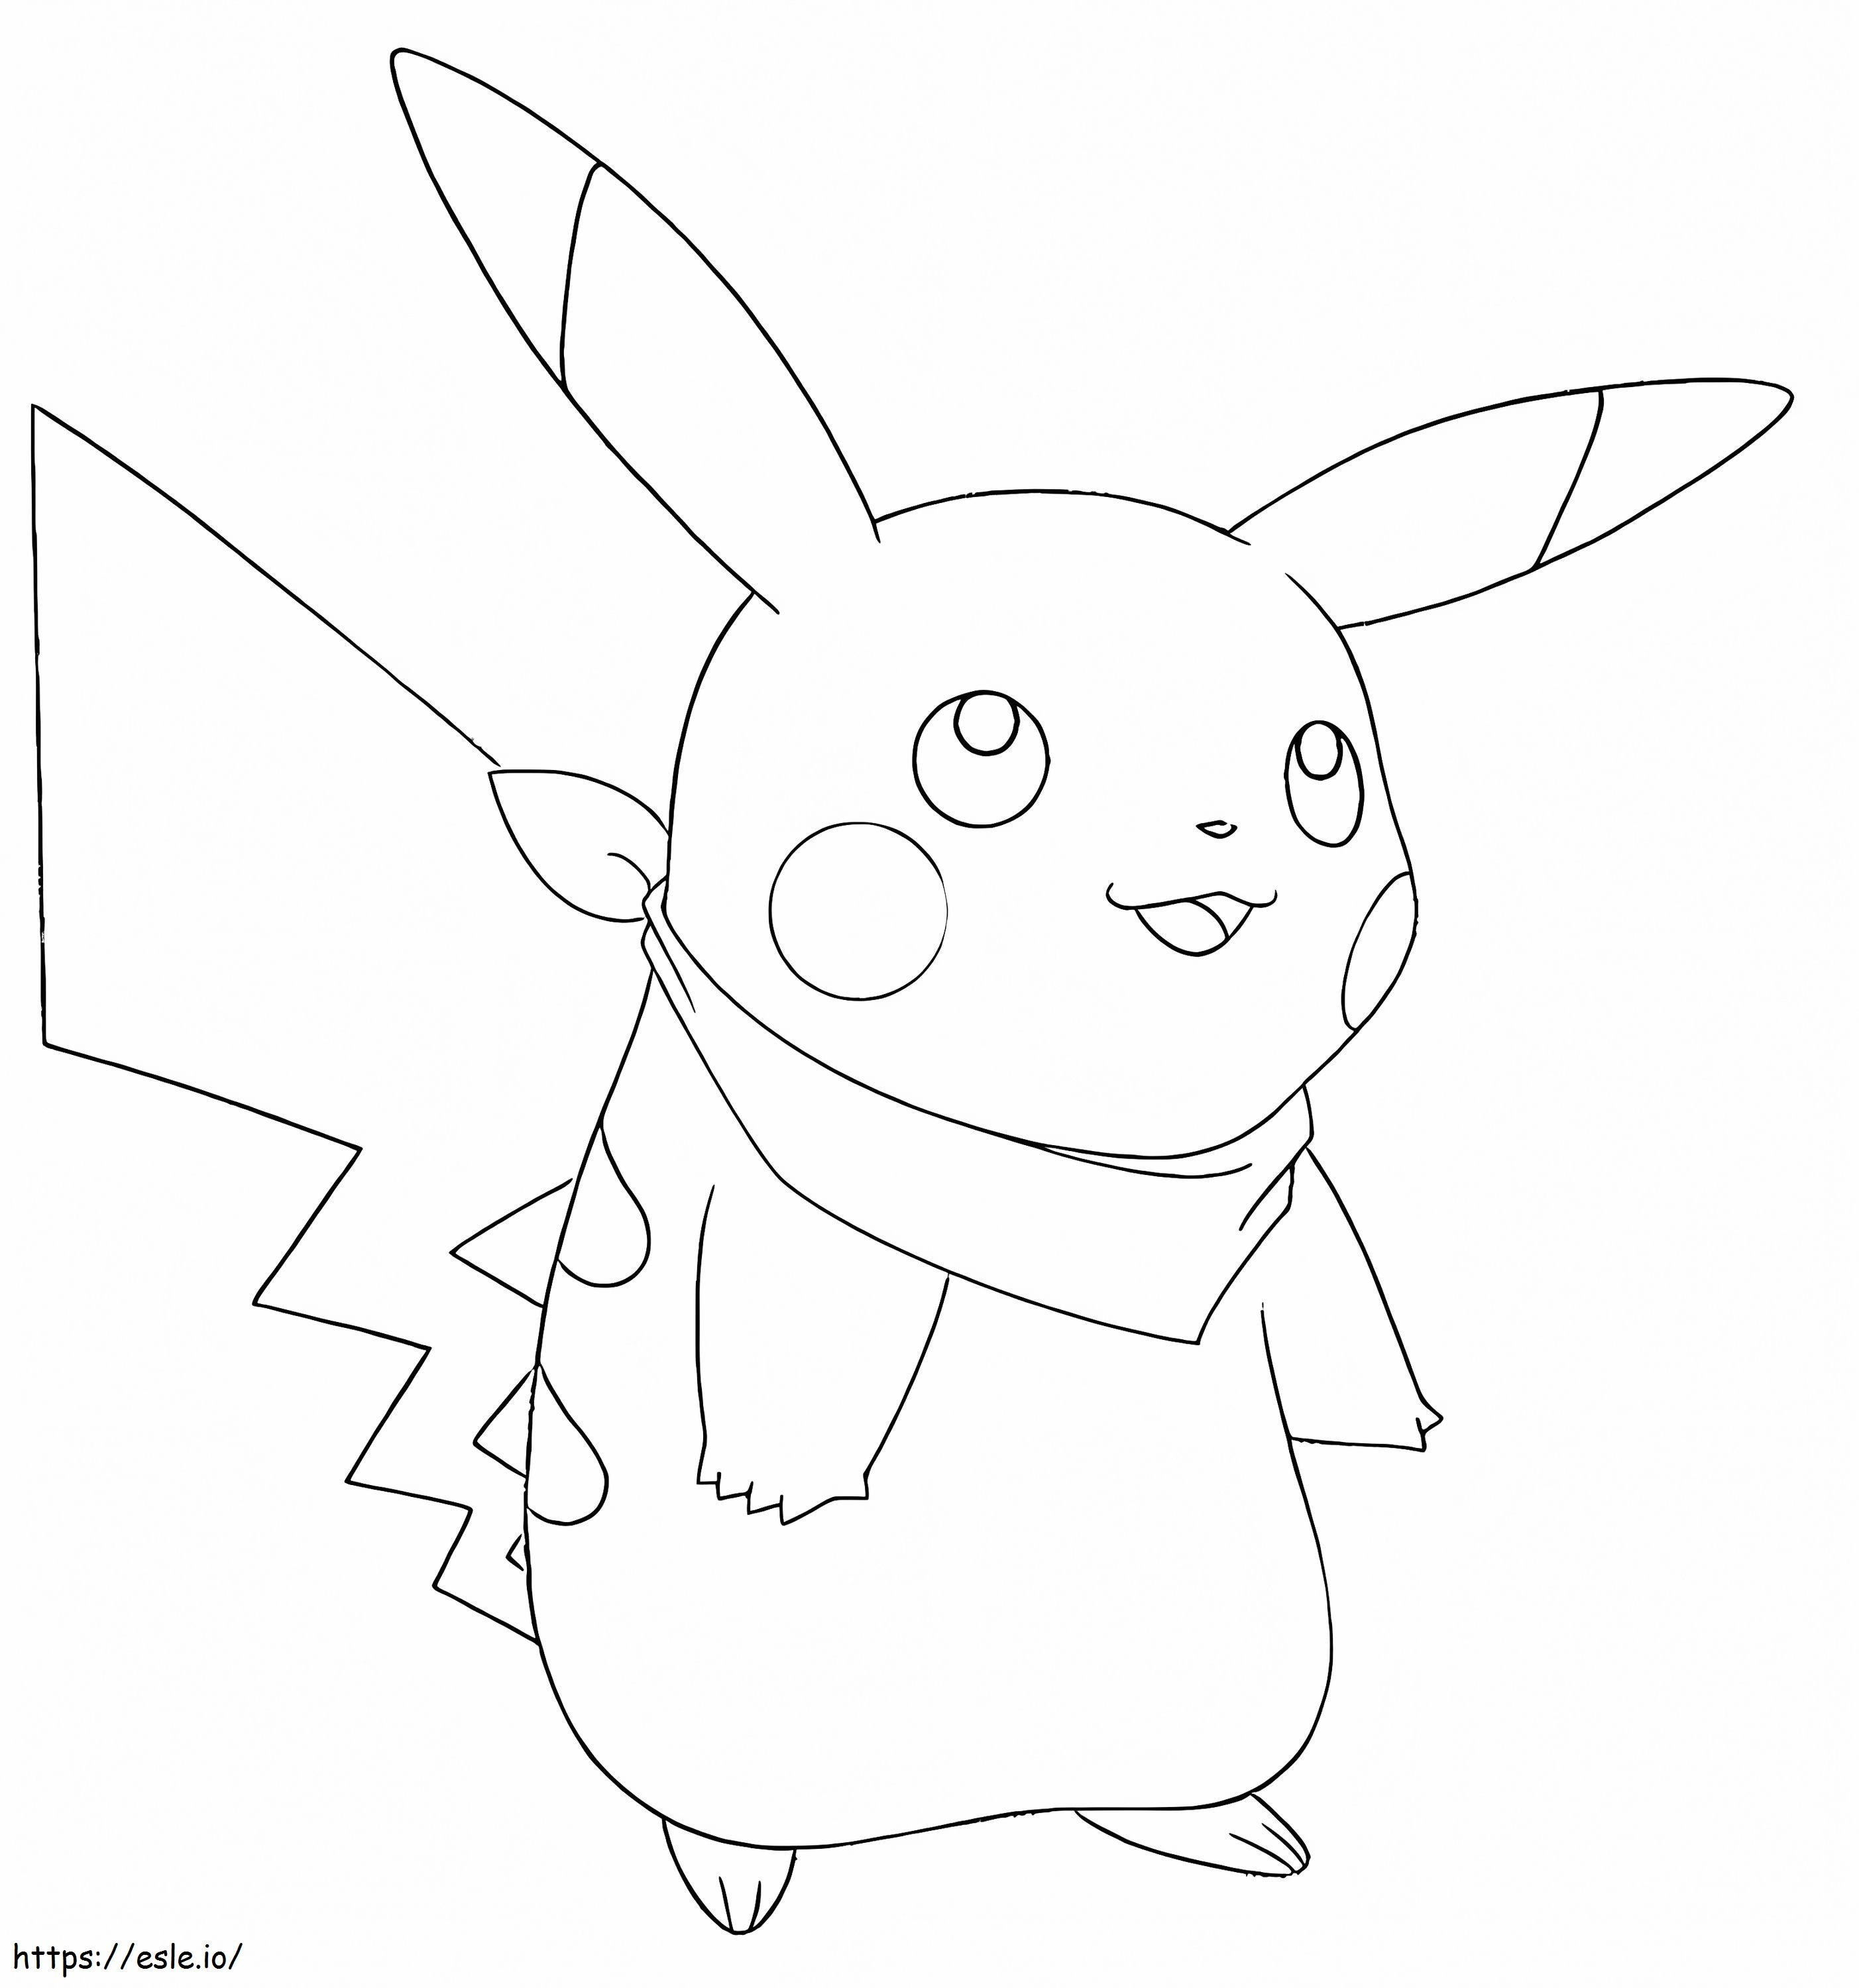 Pikachu Wearing A Scarf coloring page